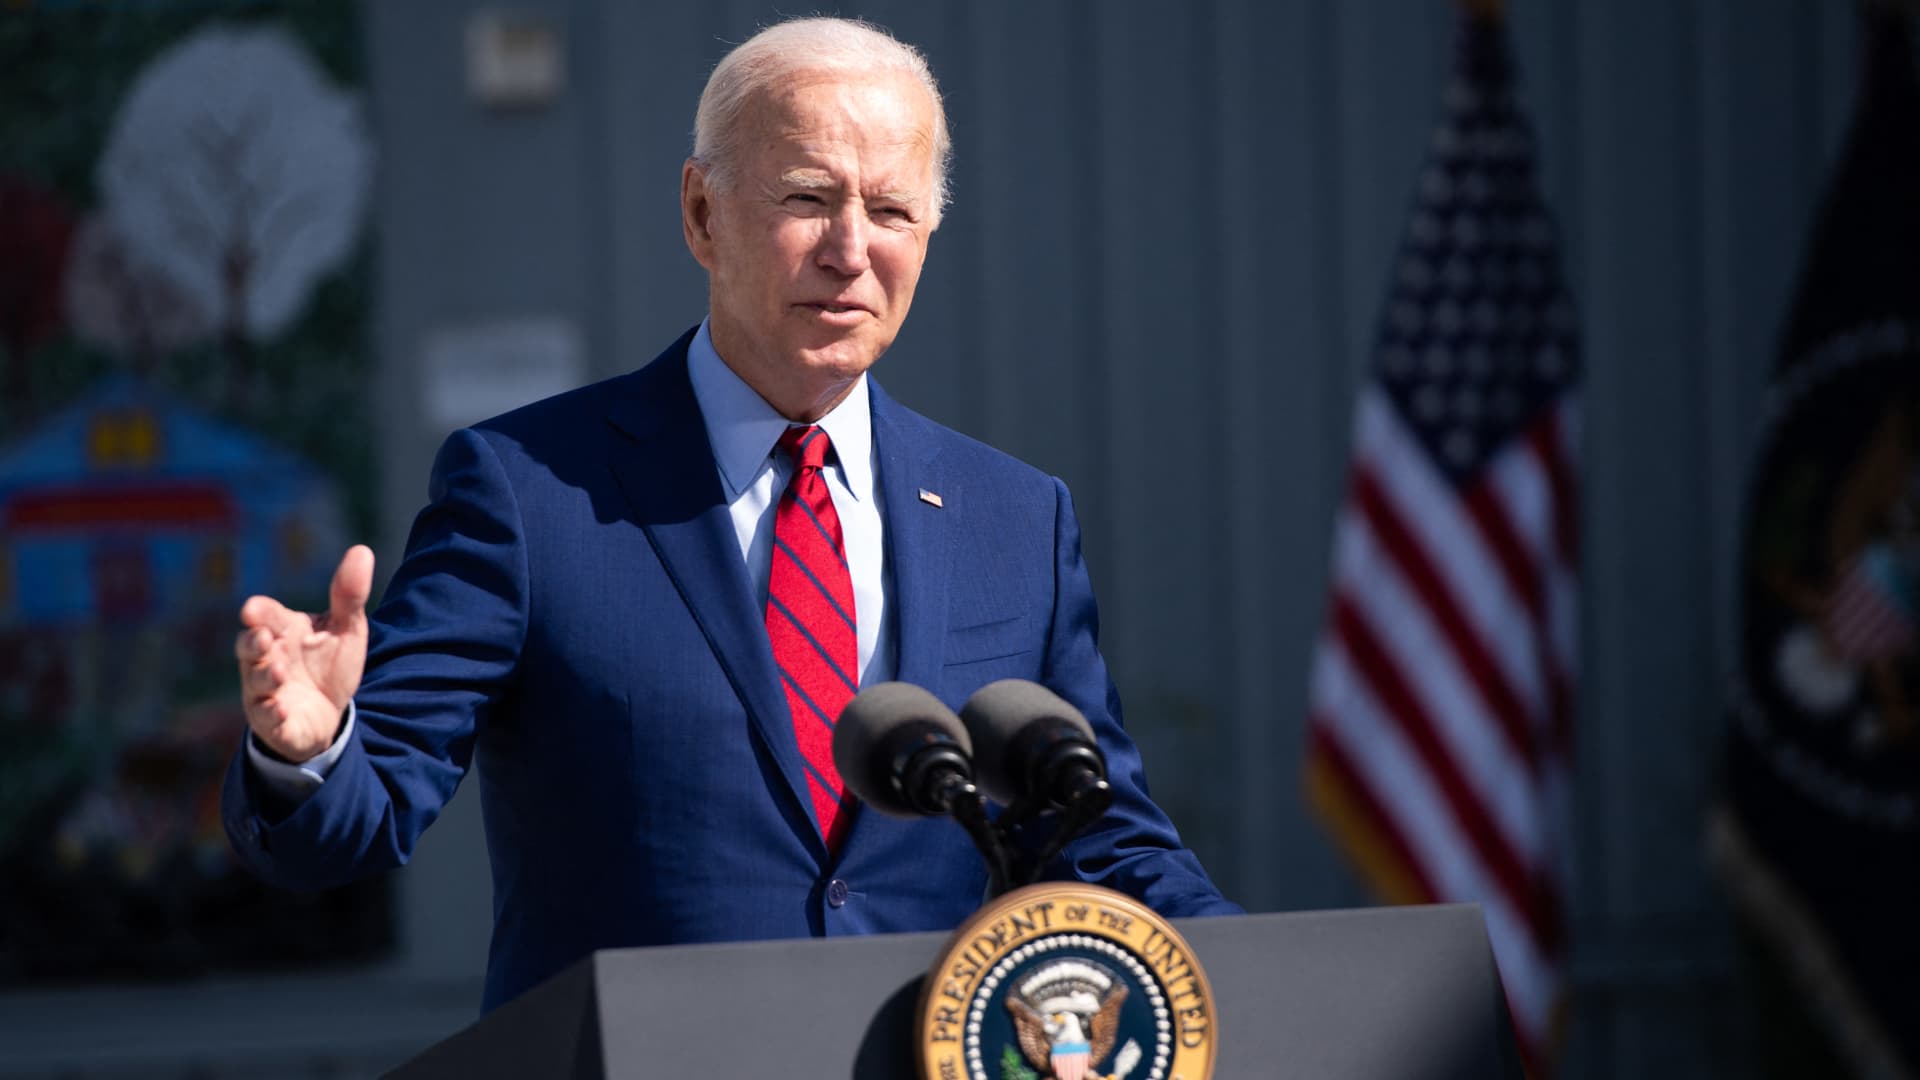 US President Joe Biden speaks about coronavirus protections in schools during a visit to Brookland Middle School in Washington, DC, September 10, 2021.